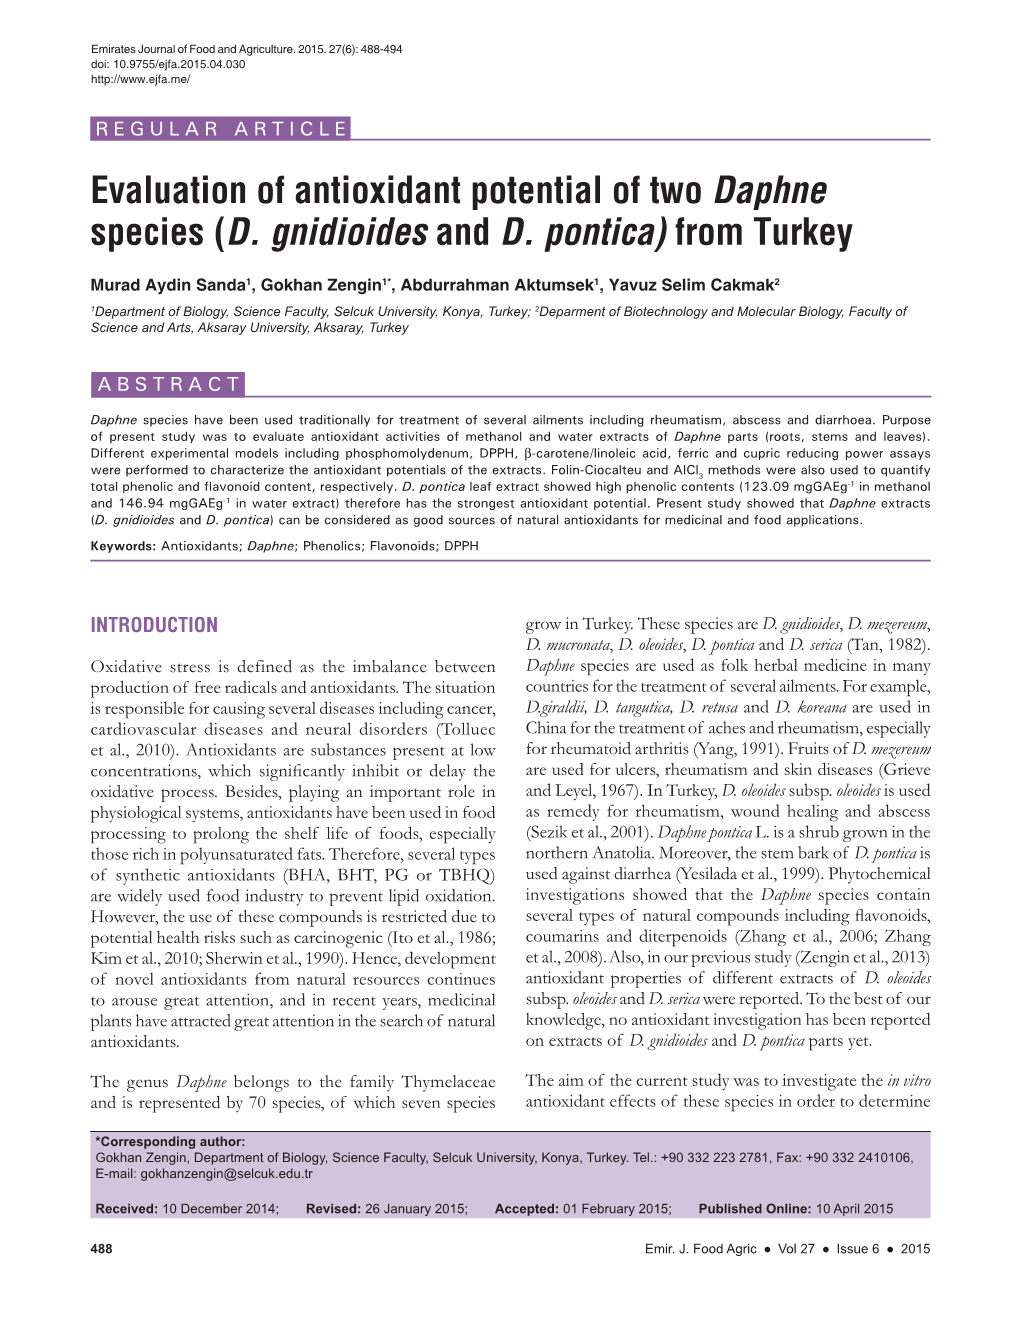 Evaluation of Antioxidant Potential of Two Daphne Species (D. Gnidioides and D